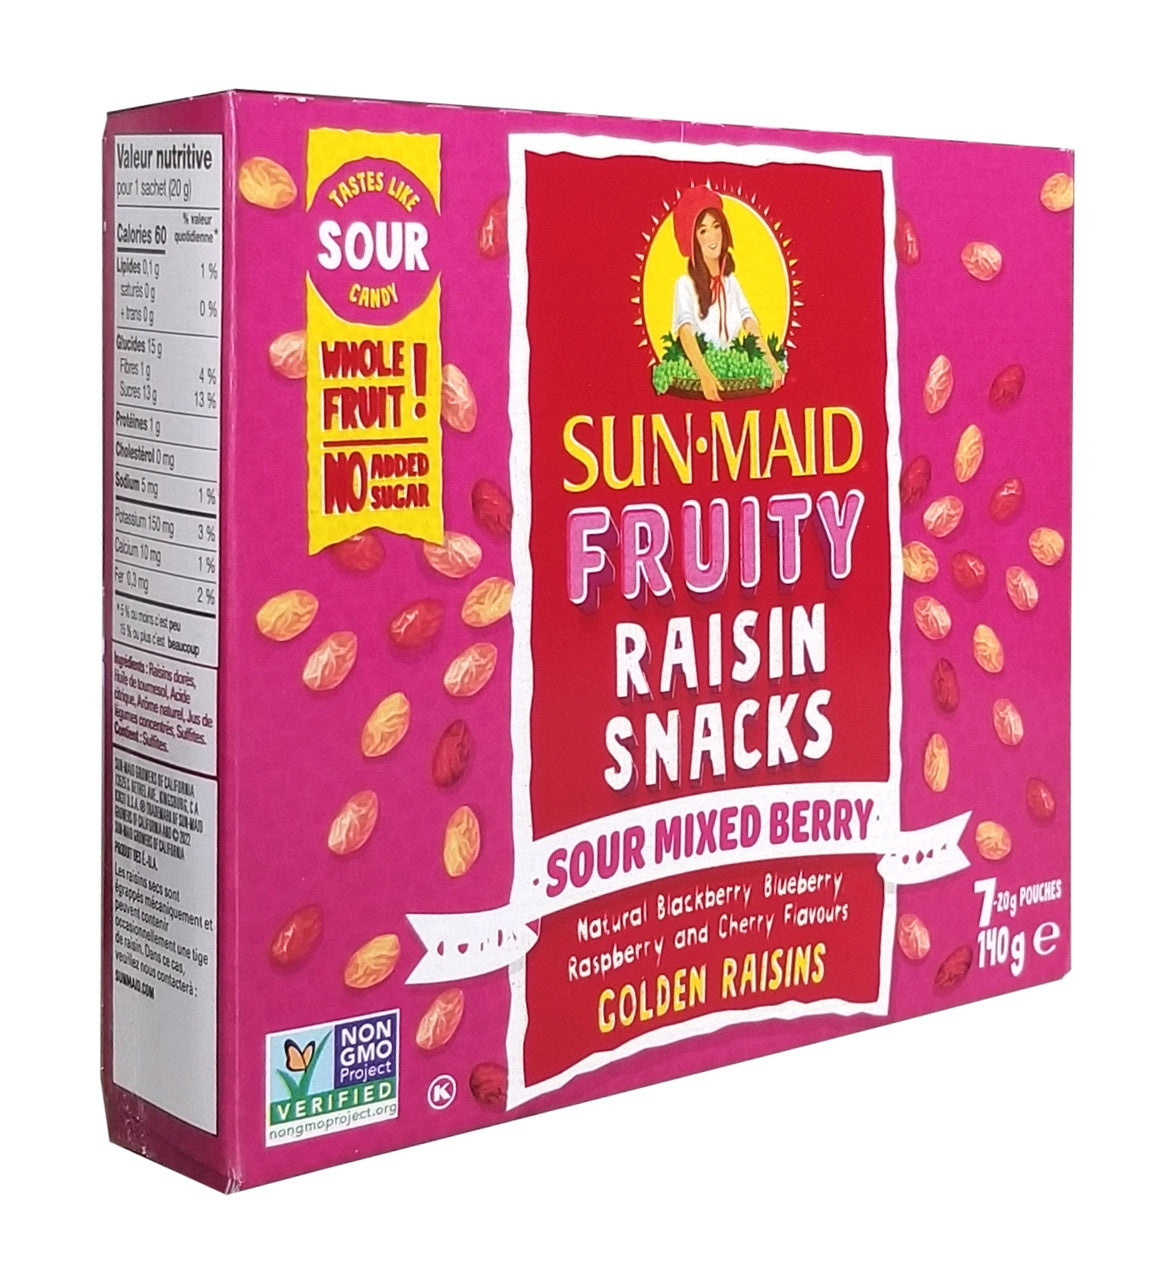 Sun-Maid Fruity Raisin Snacks, Sour Mixed Berry, 140g/5 oz. Box {Imported from Canada}